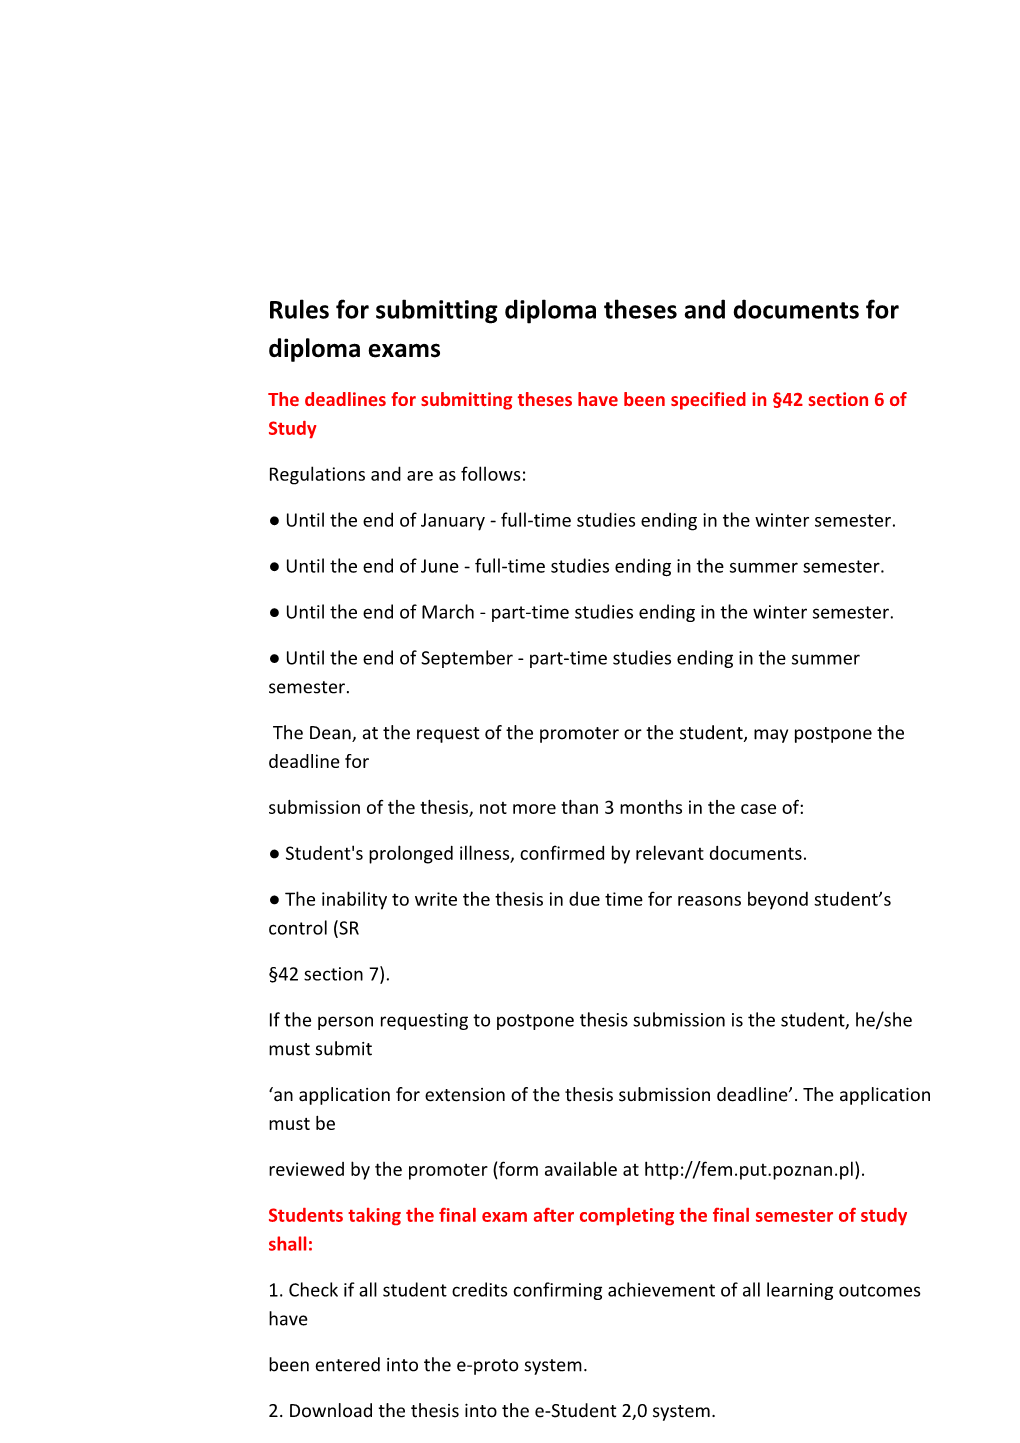 Rules for Submitting Diploma Theses and Documents for Diploma Exams